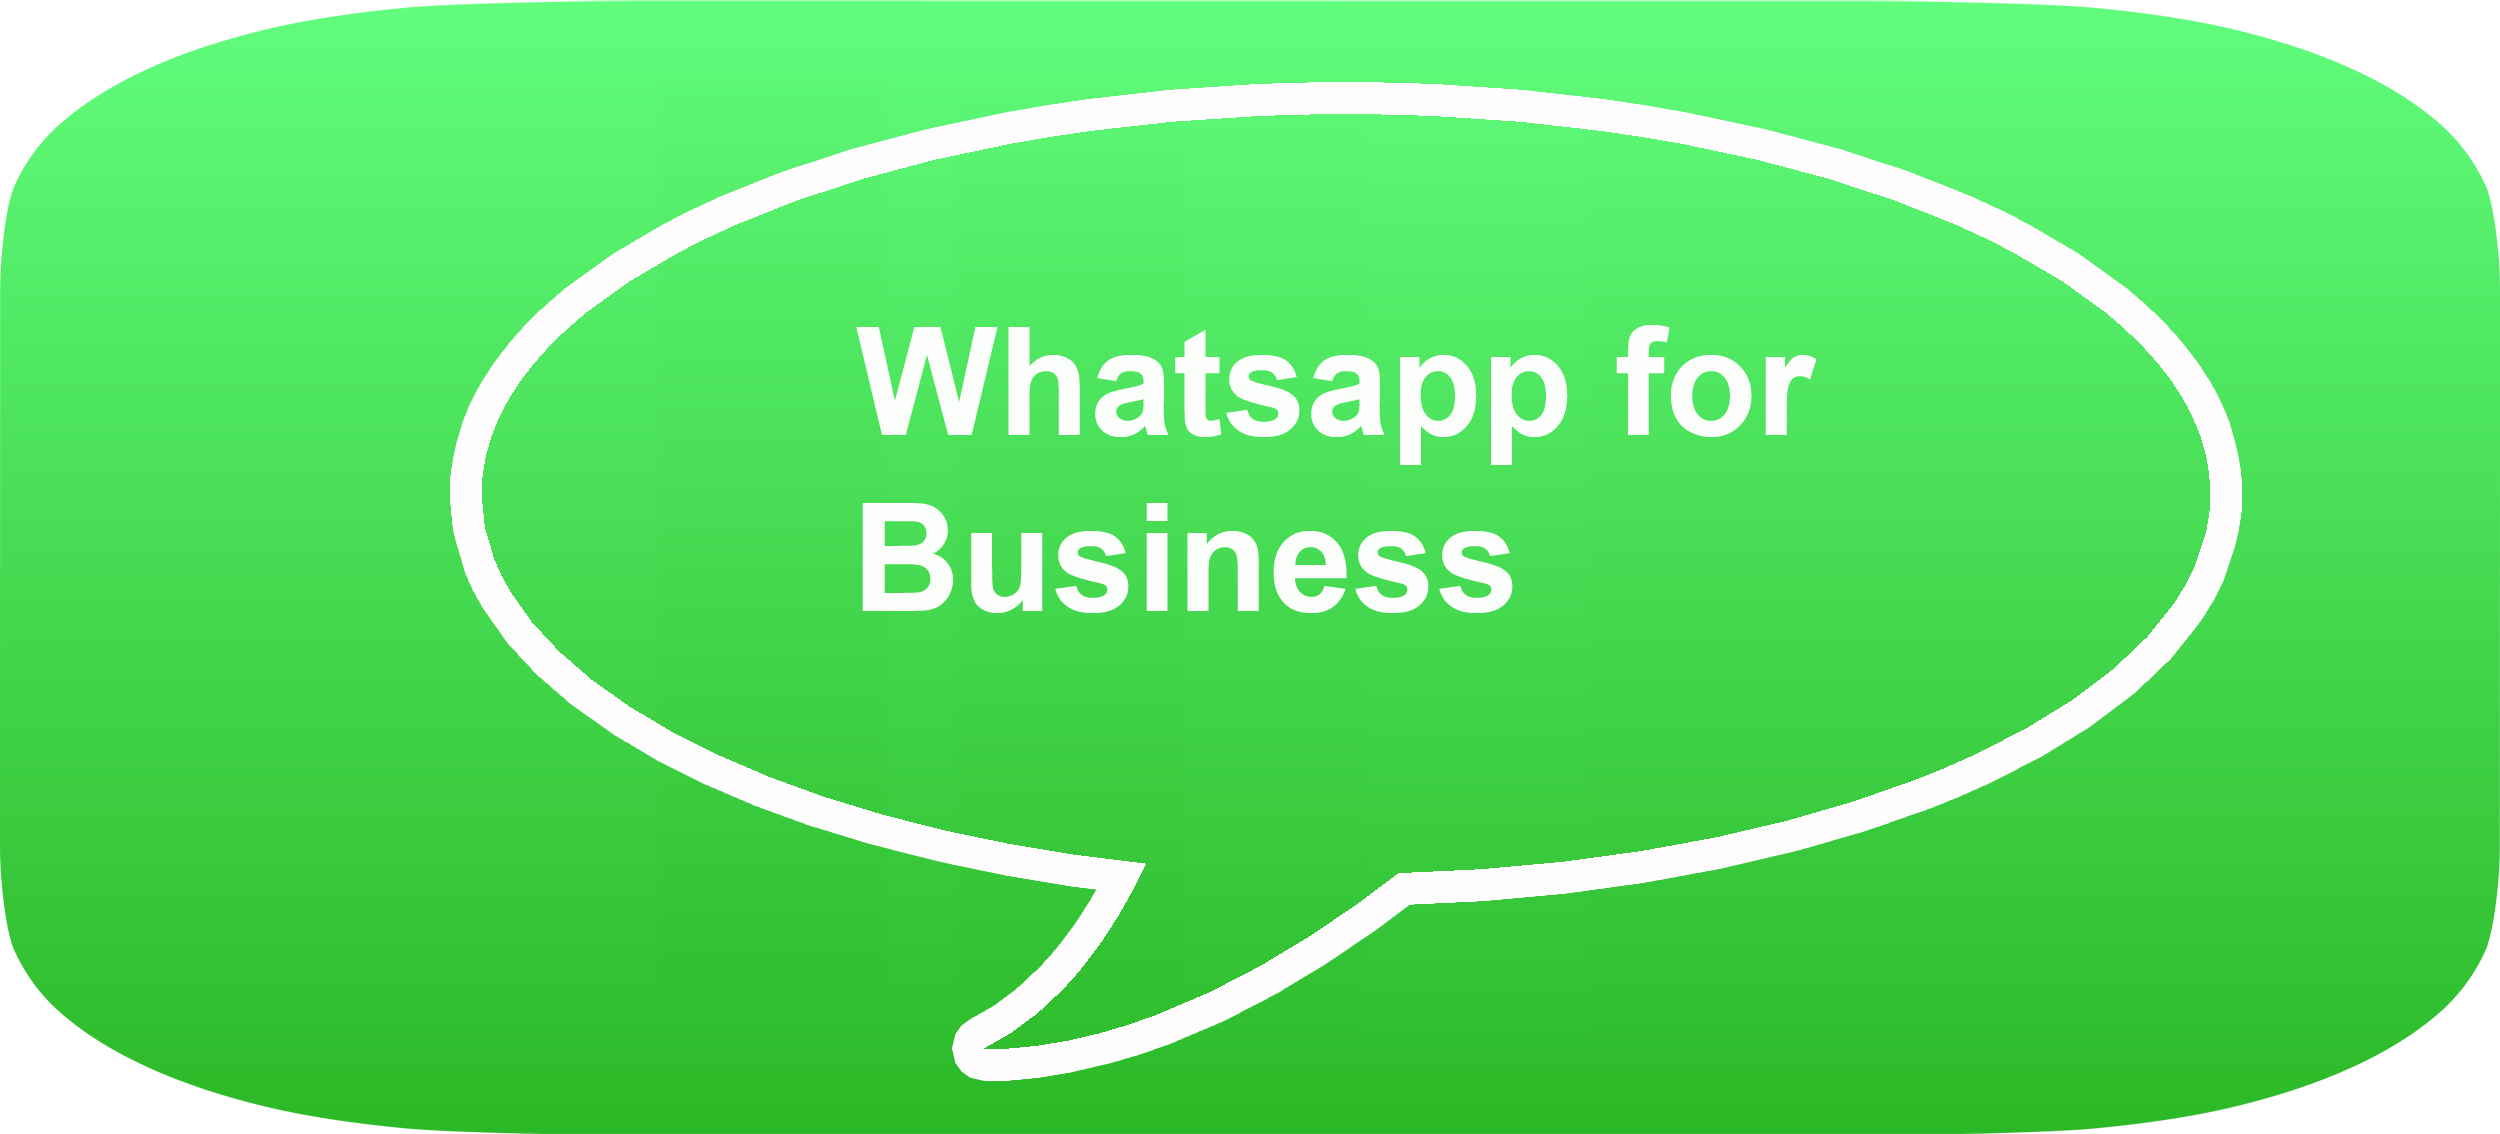 Empower your customers so they can effortlessly handle WhatsApp Business Messages Using our Cutting-